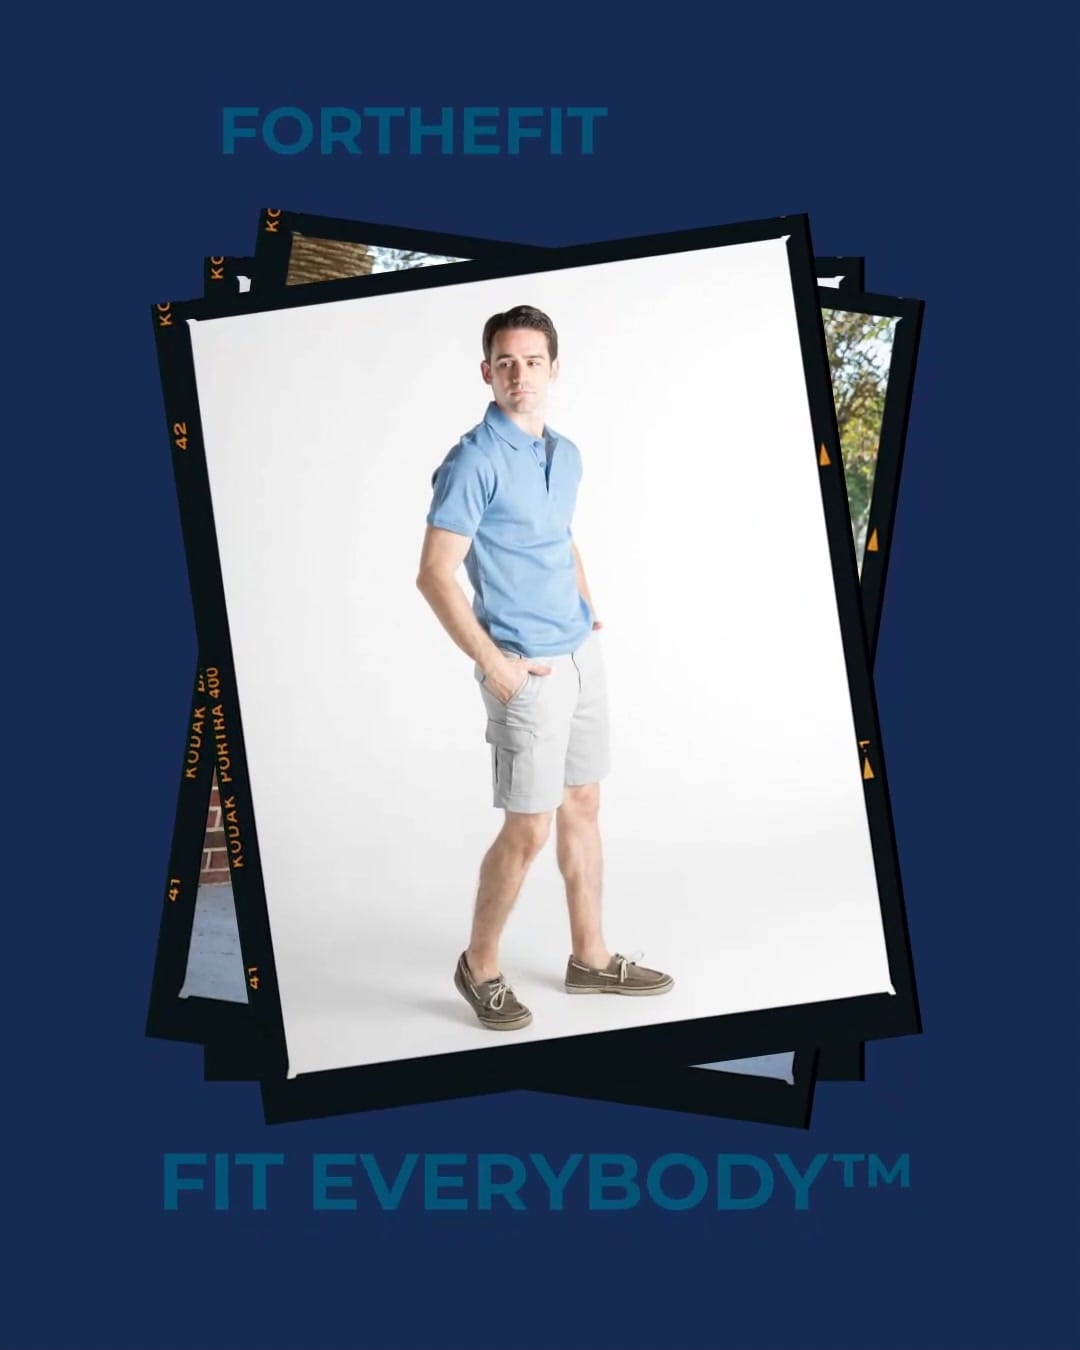 Load video: Tall. Short. Petite. Mens &amp; Women&#39;s. Check out our assortment of clothing styles for every body shape and size. FIT is for EveryBODY™ at FORtheFIT.com